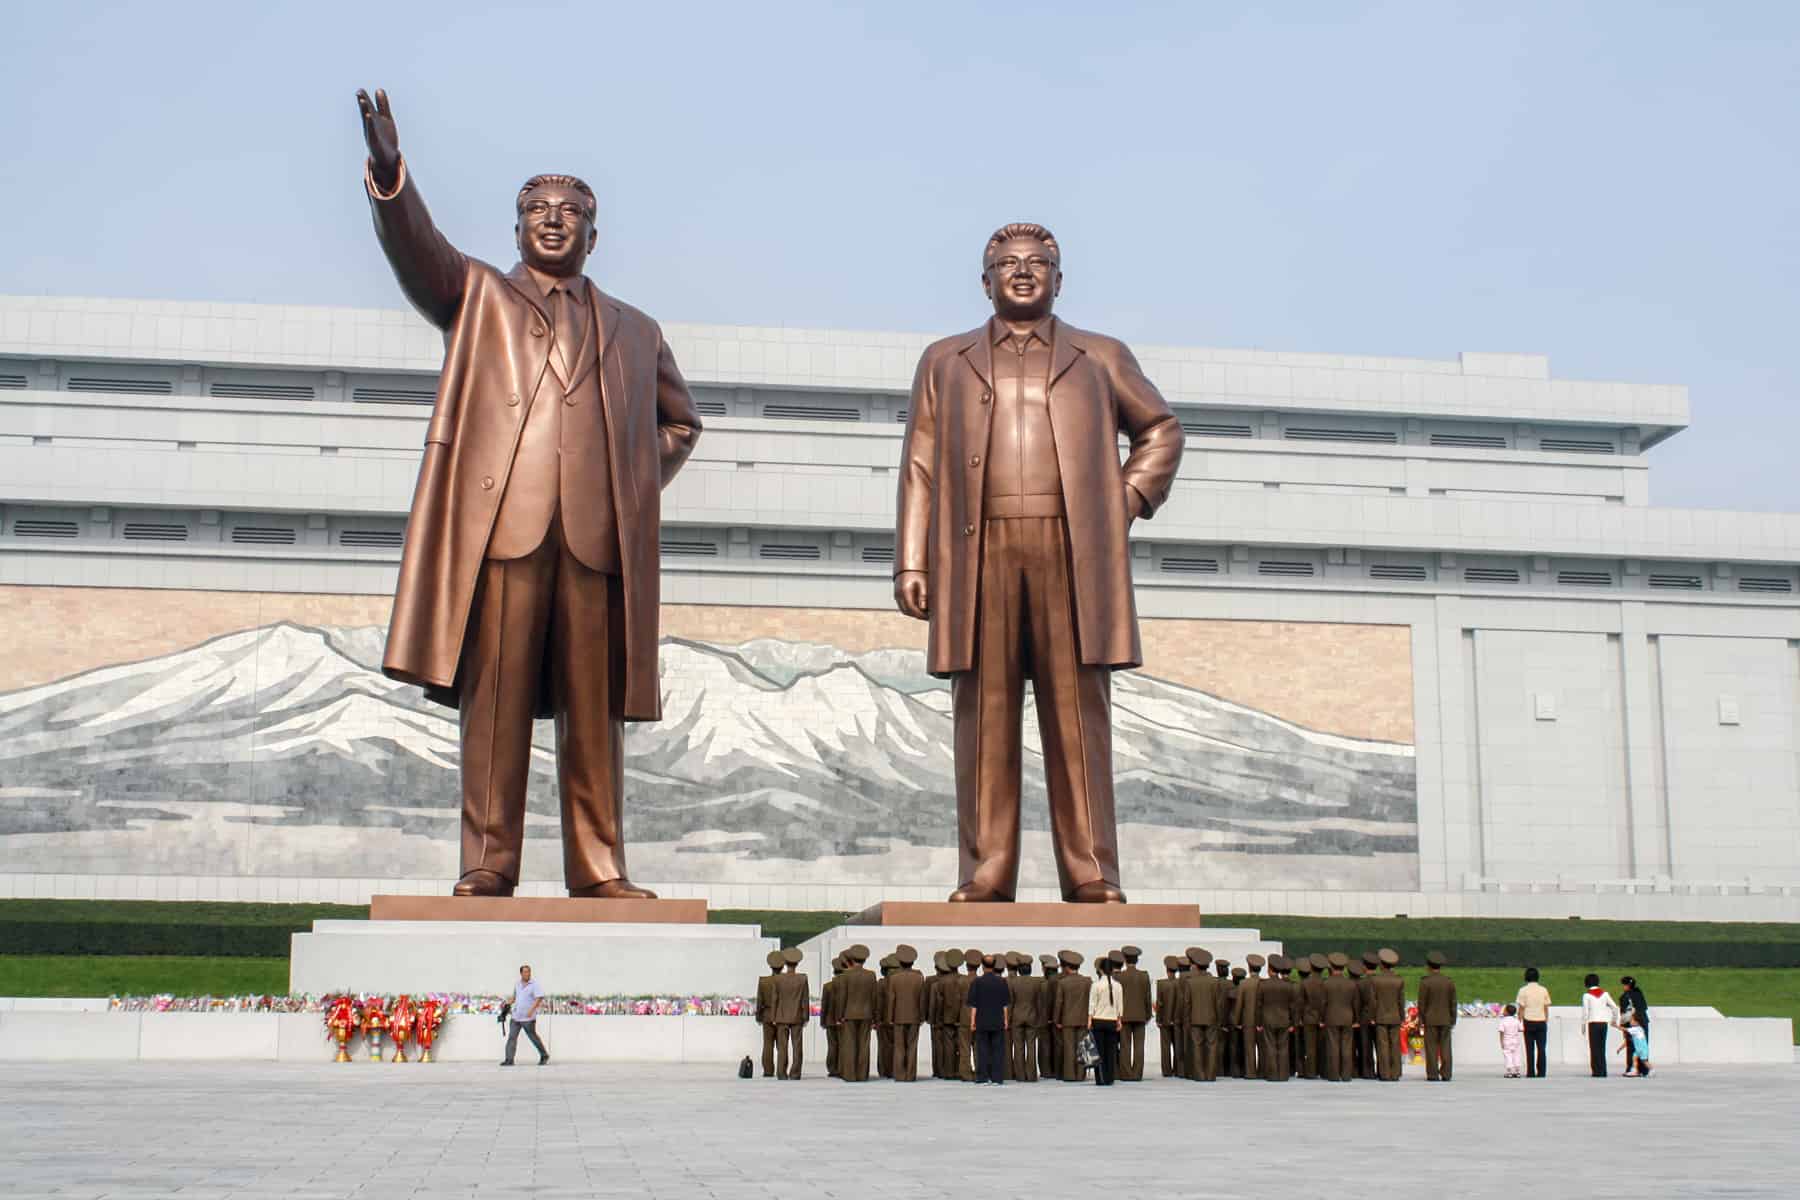 Two bronze statues of the Kims in North Korea.